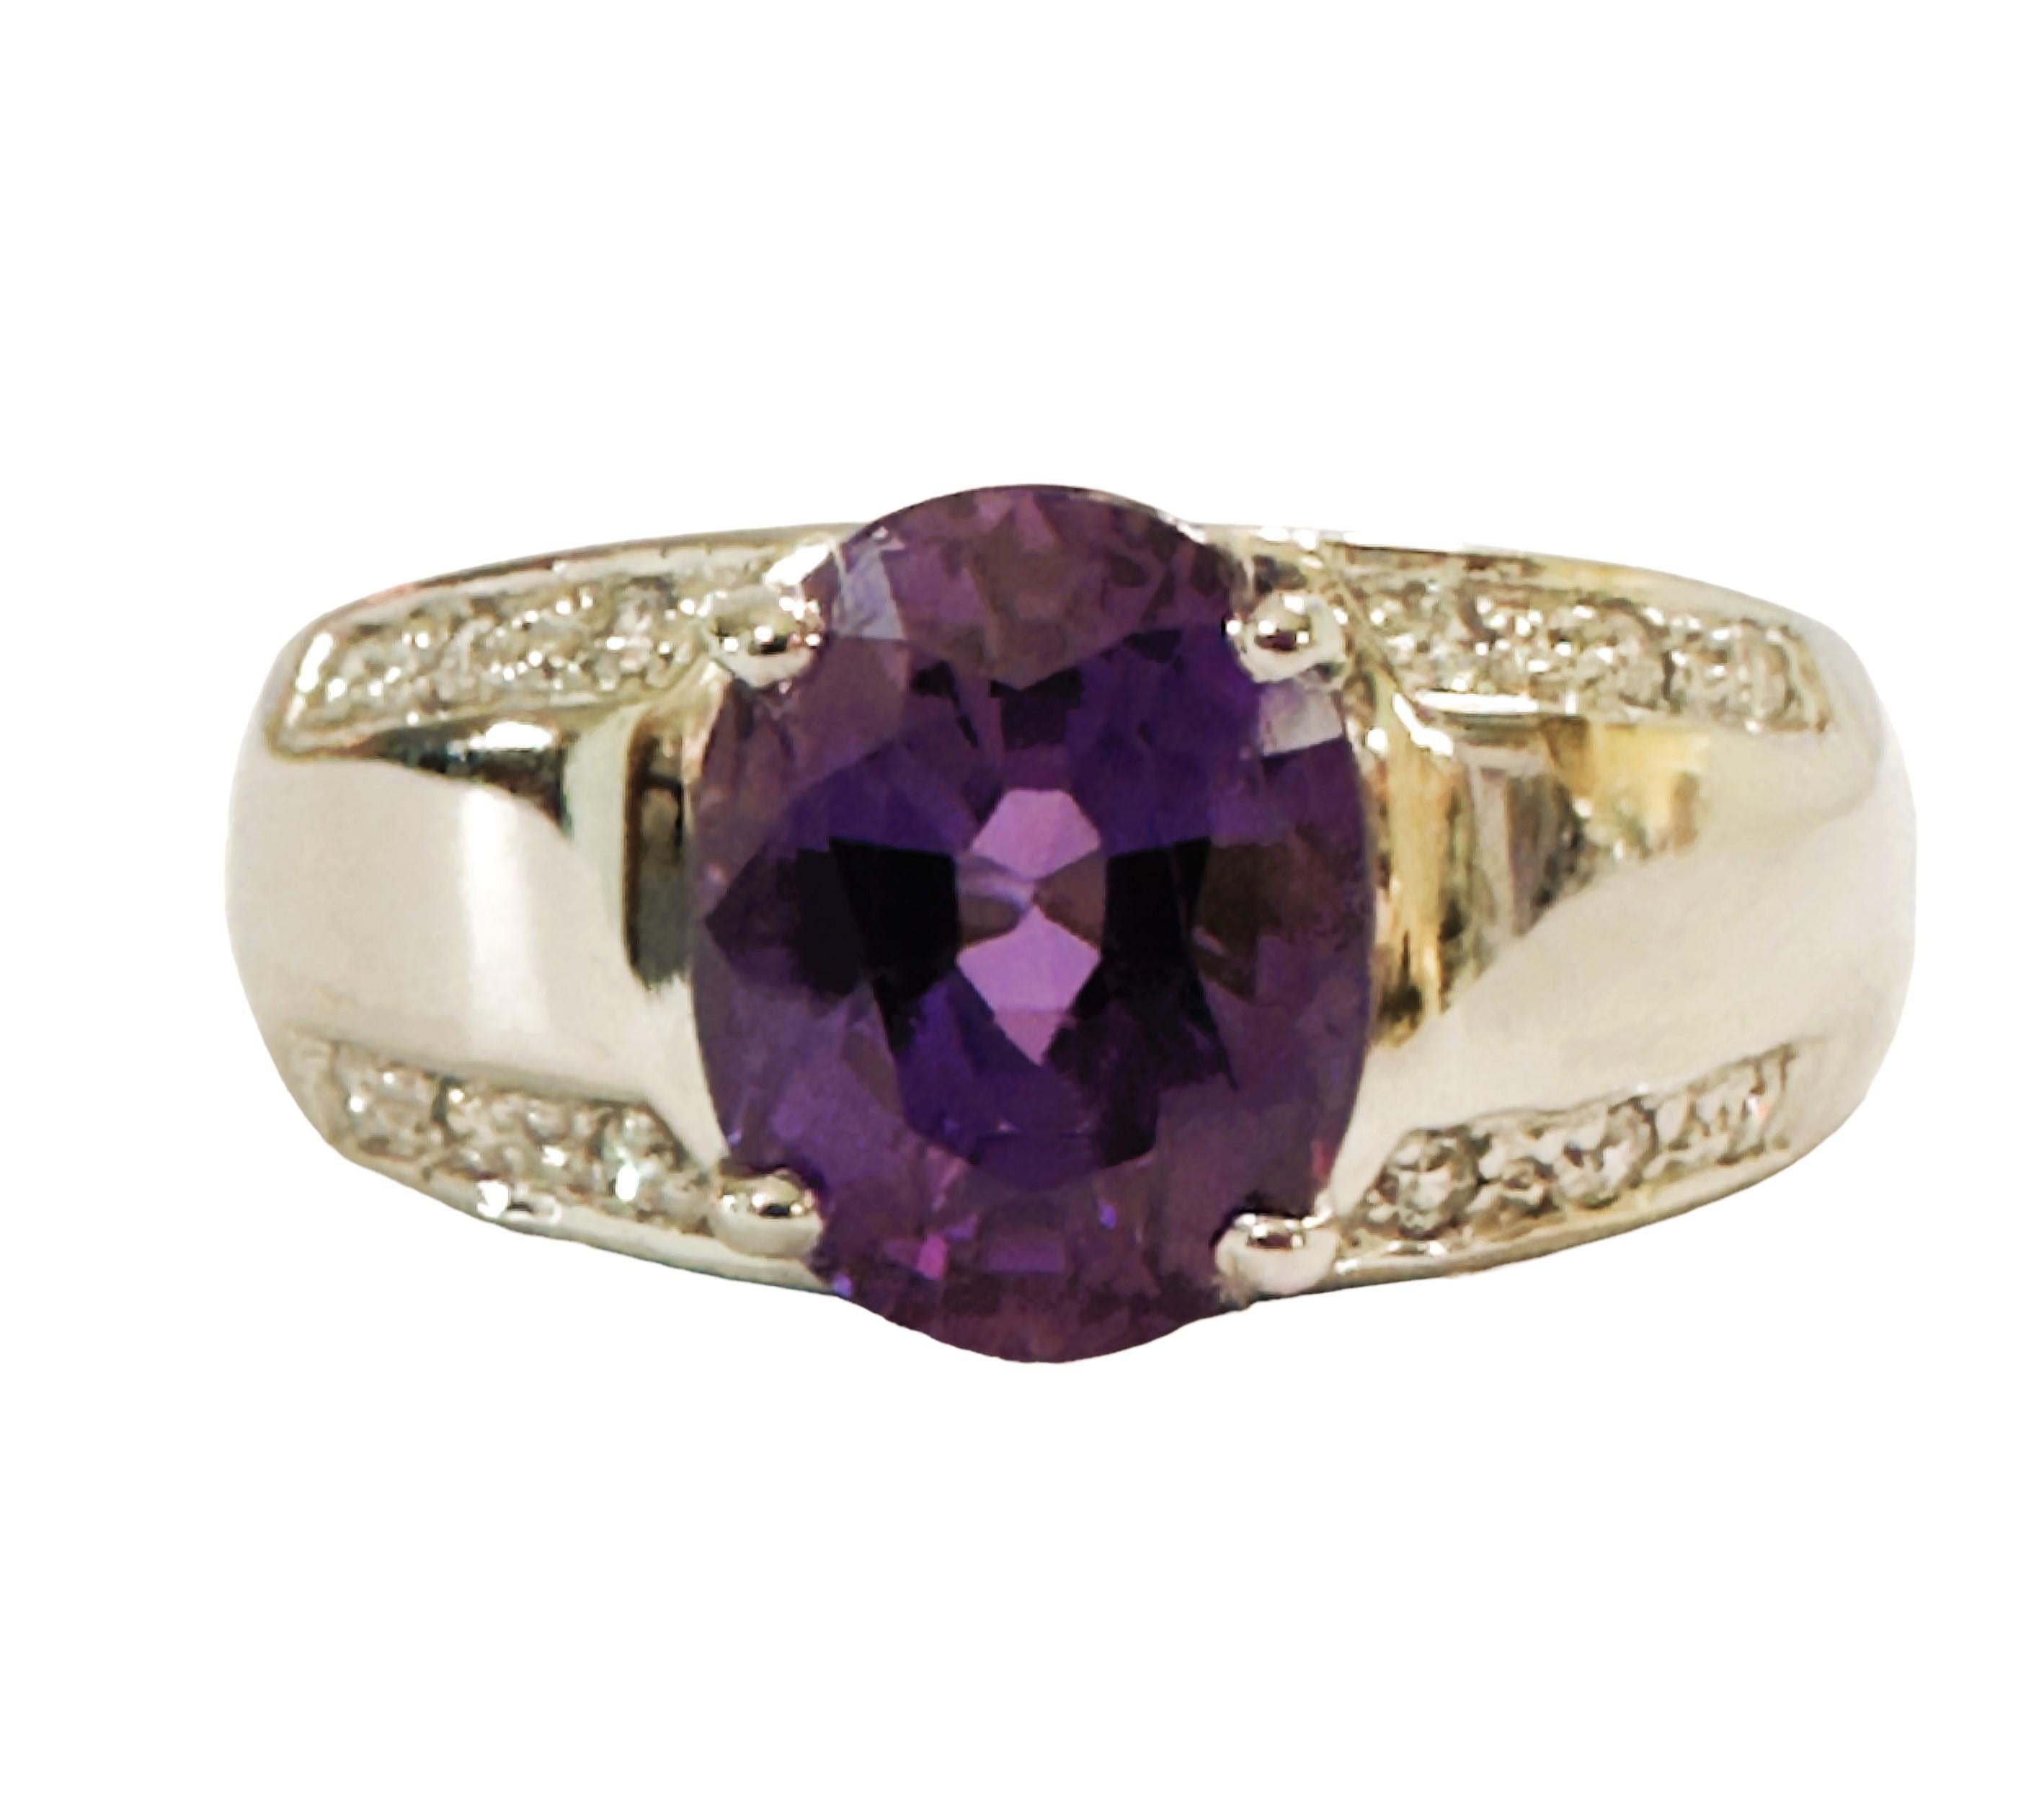 This stone has such gorgeous color!  The ring is a size 9.25.  The stone is from Africa.   It is a highly rated IF (Internally Flawless) stone.  The stone is an oval cut stone and is 3.20 cts.  It measures 9.2 x 7 mm.  It is has two rows of diamond